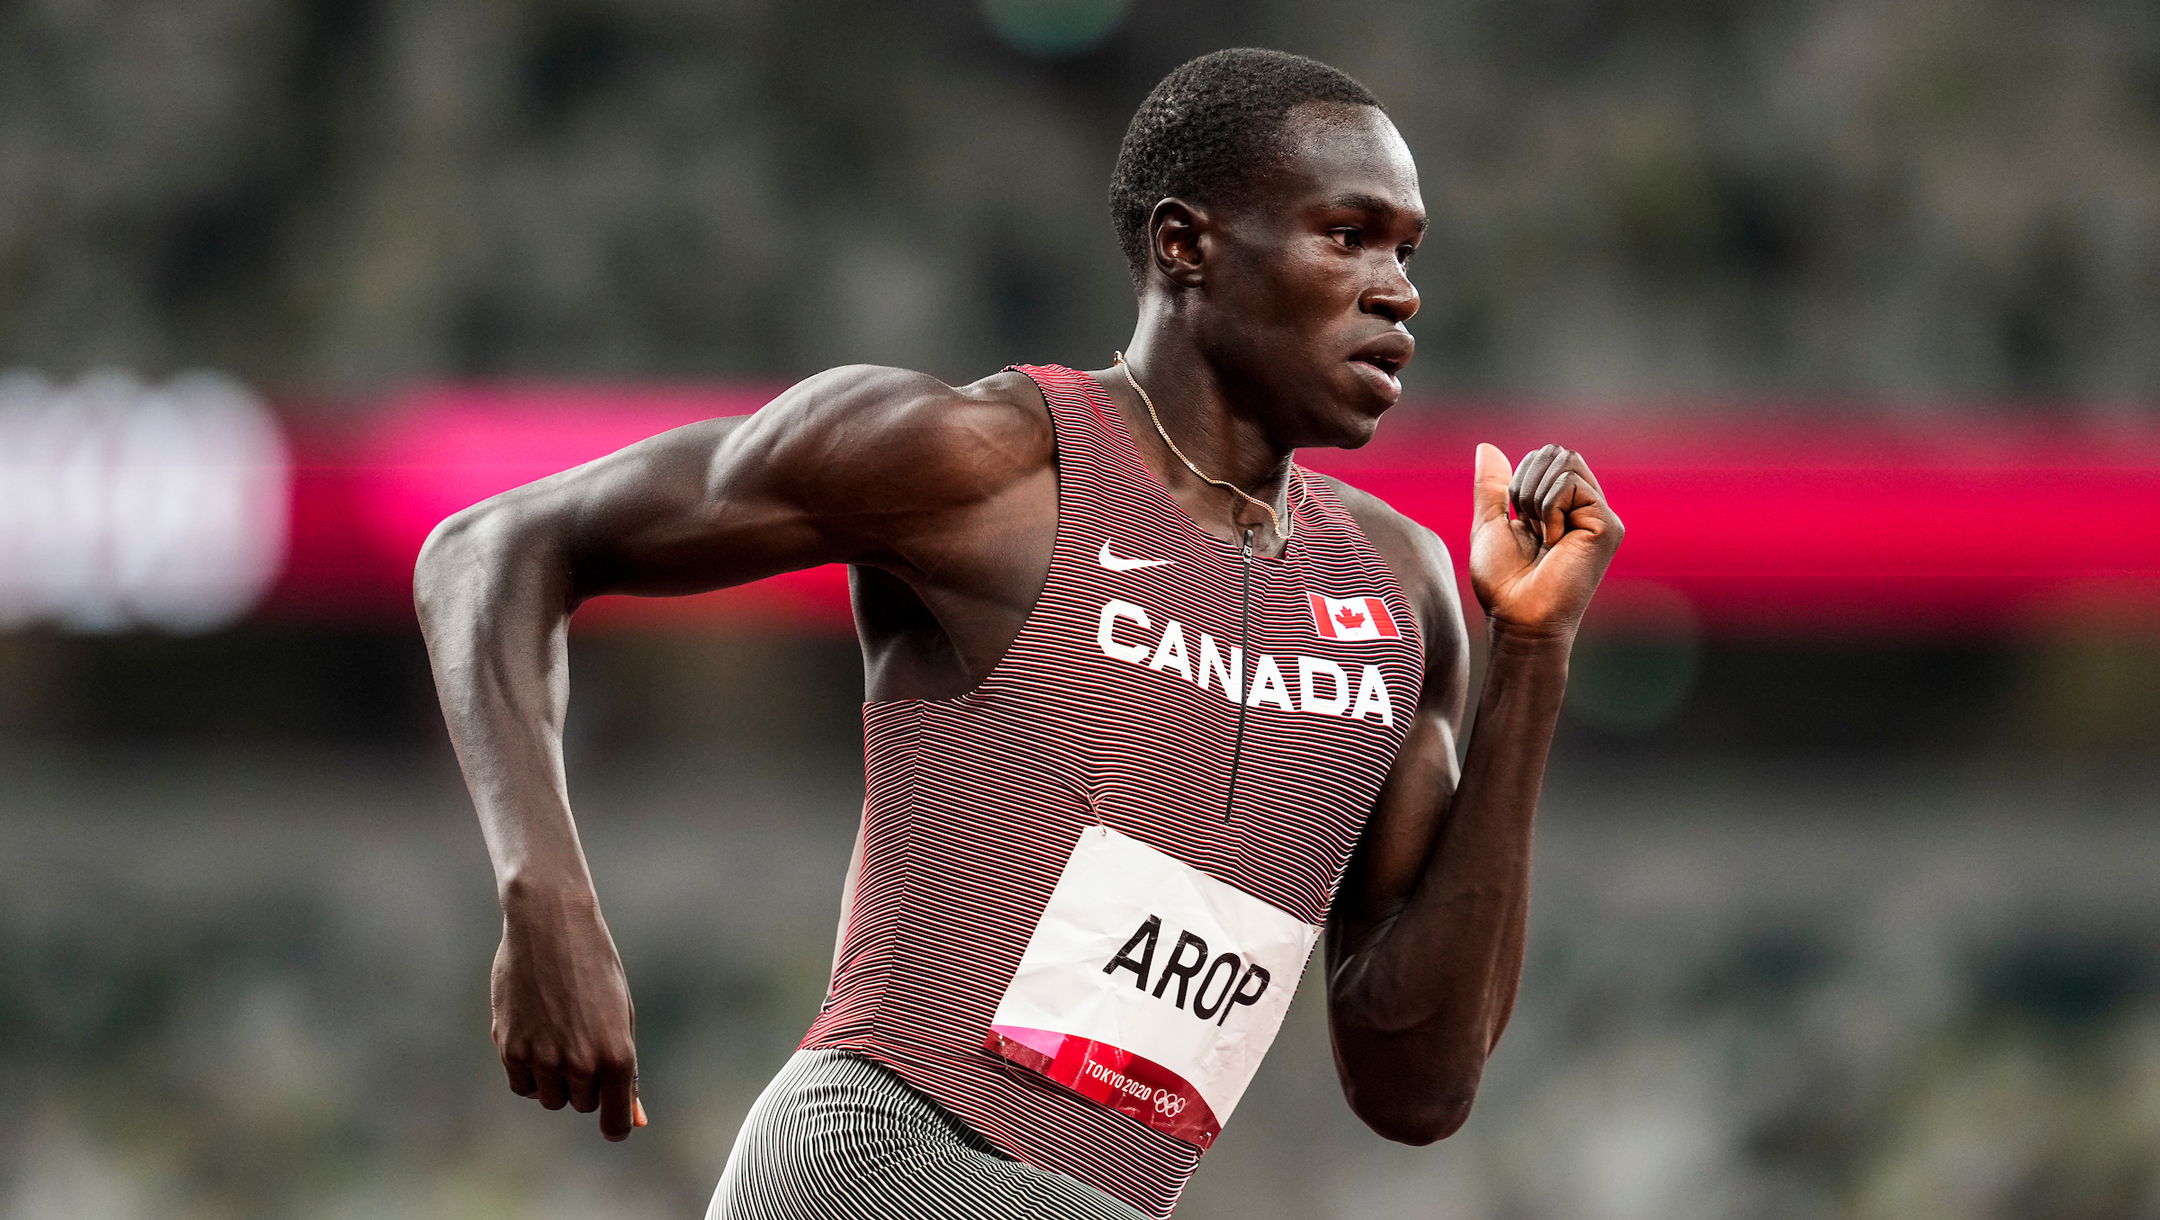 Marco Arop Team Canada Official Olympic Team Website